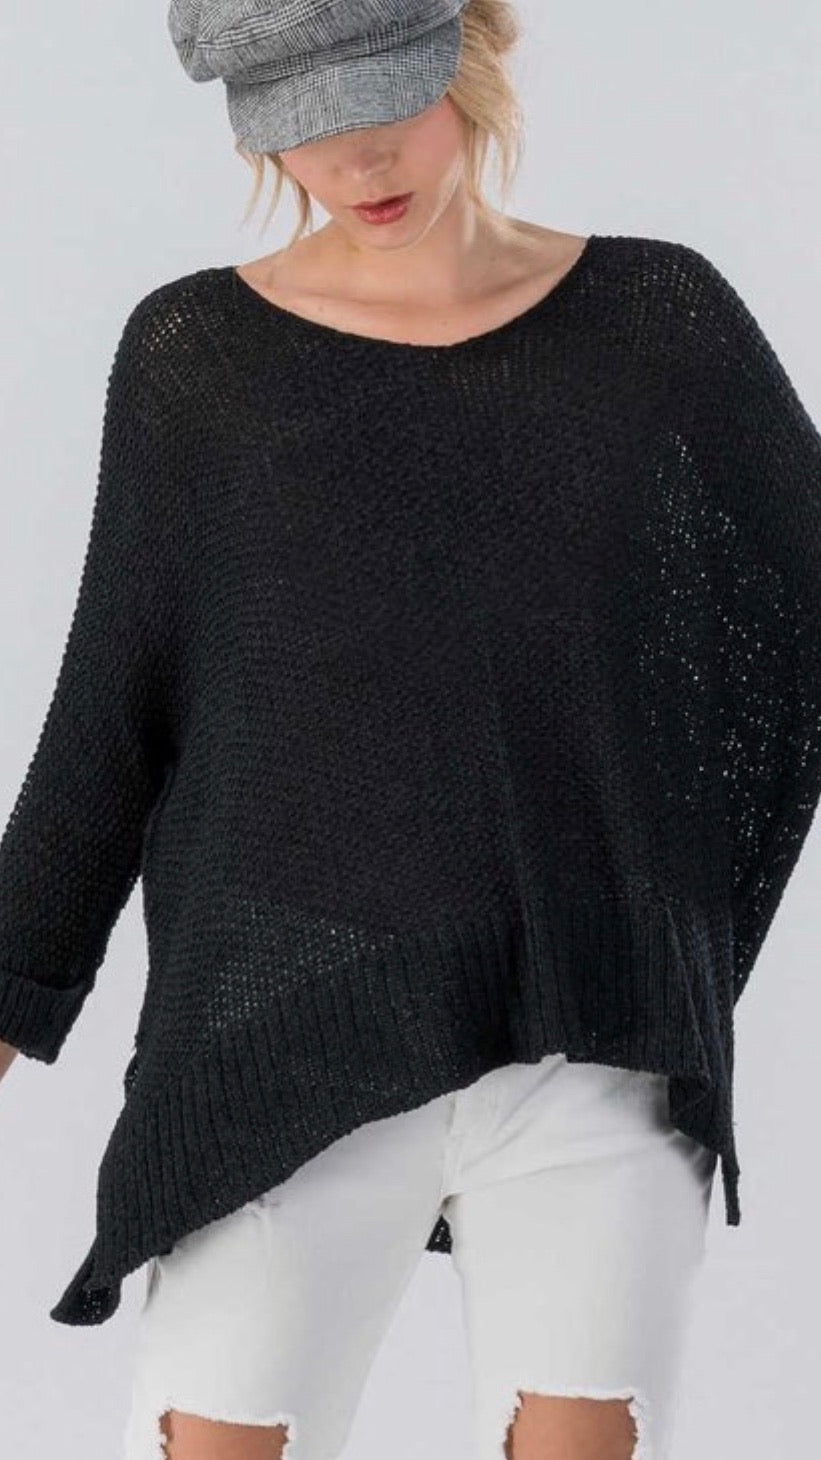 Misty Dolman Sleeve Sweater - Corinne an Affordable Women's Clothing Boutique in the US USA